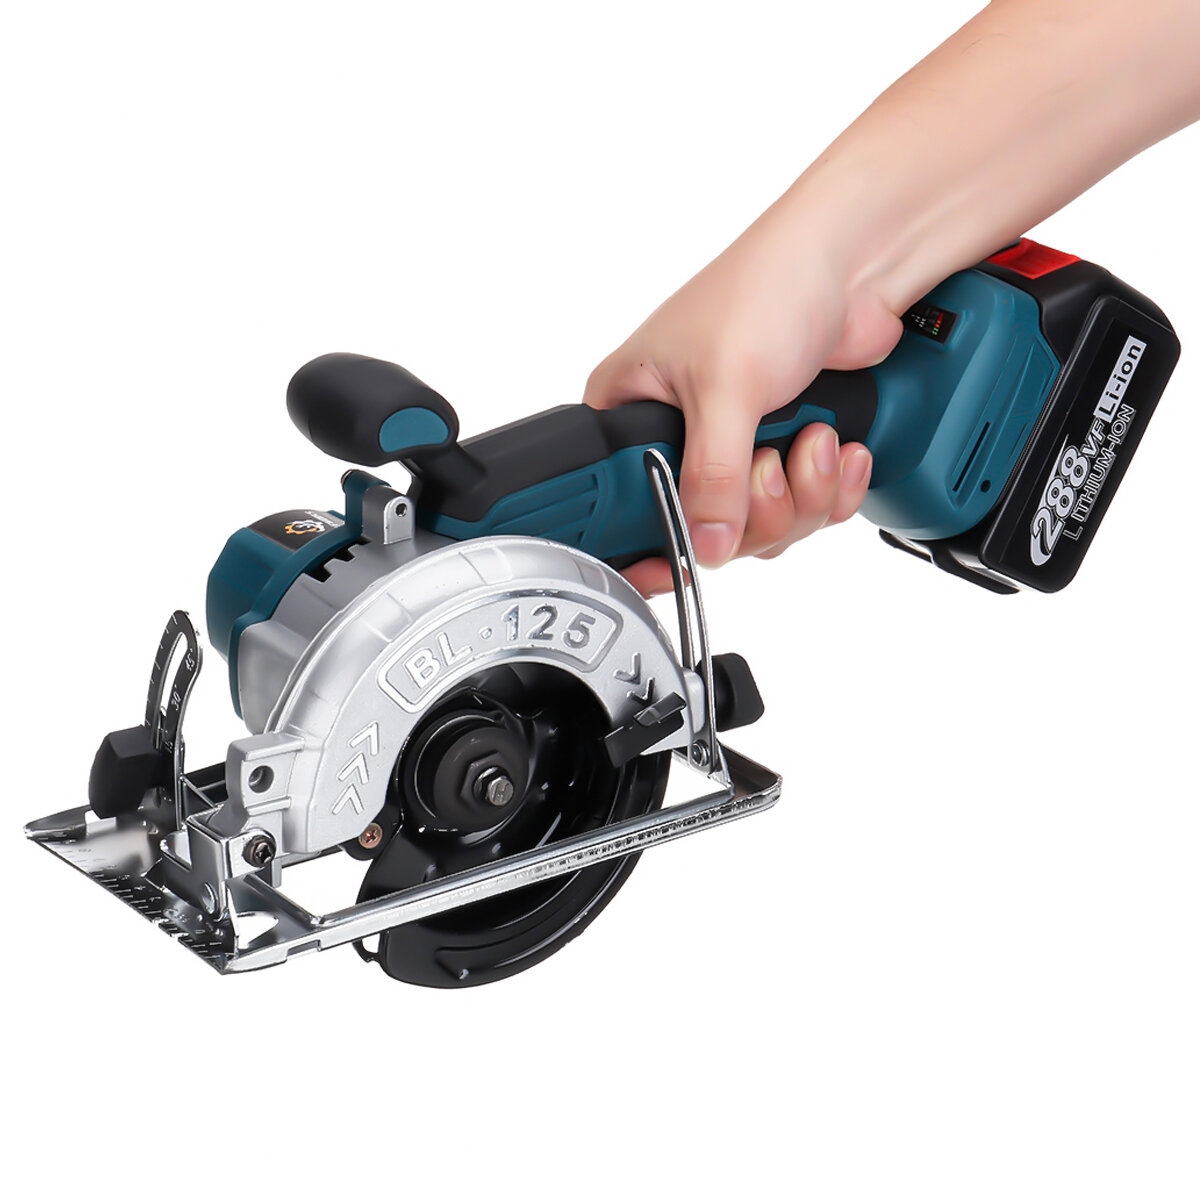 VIOLEWORKS 288VF Brushless Electric Circular Saw Cordless Wood Cutting Machine For 18V Battery